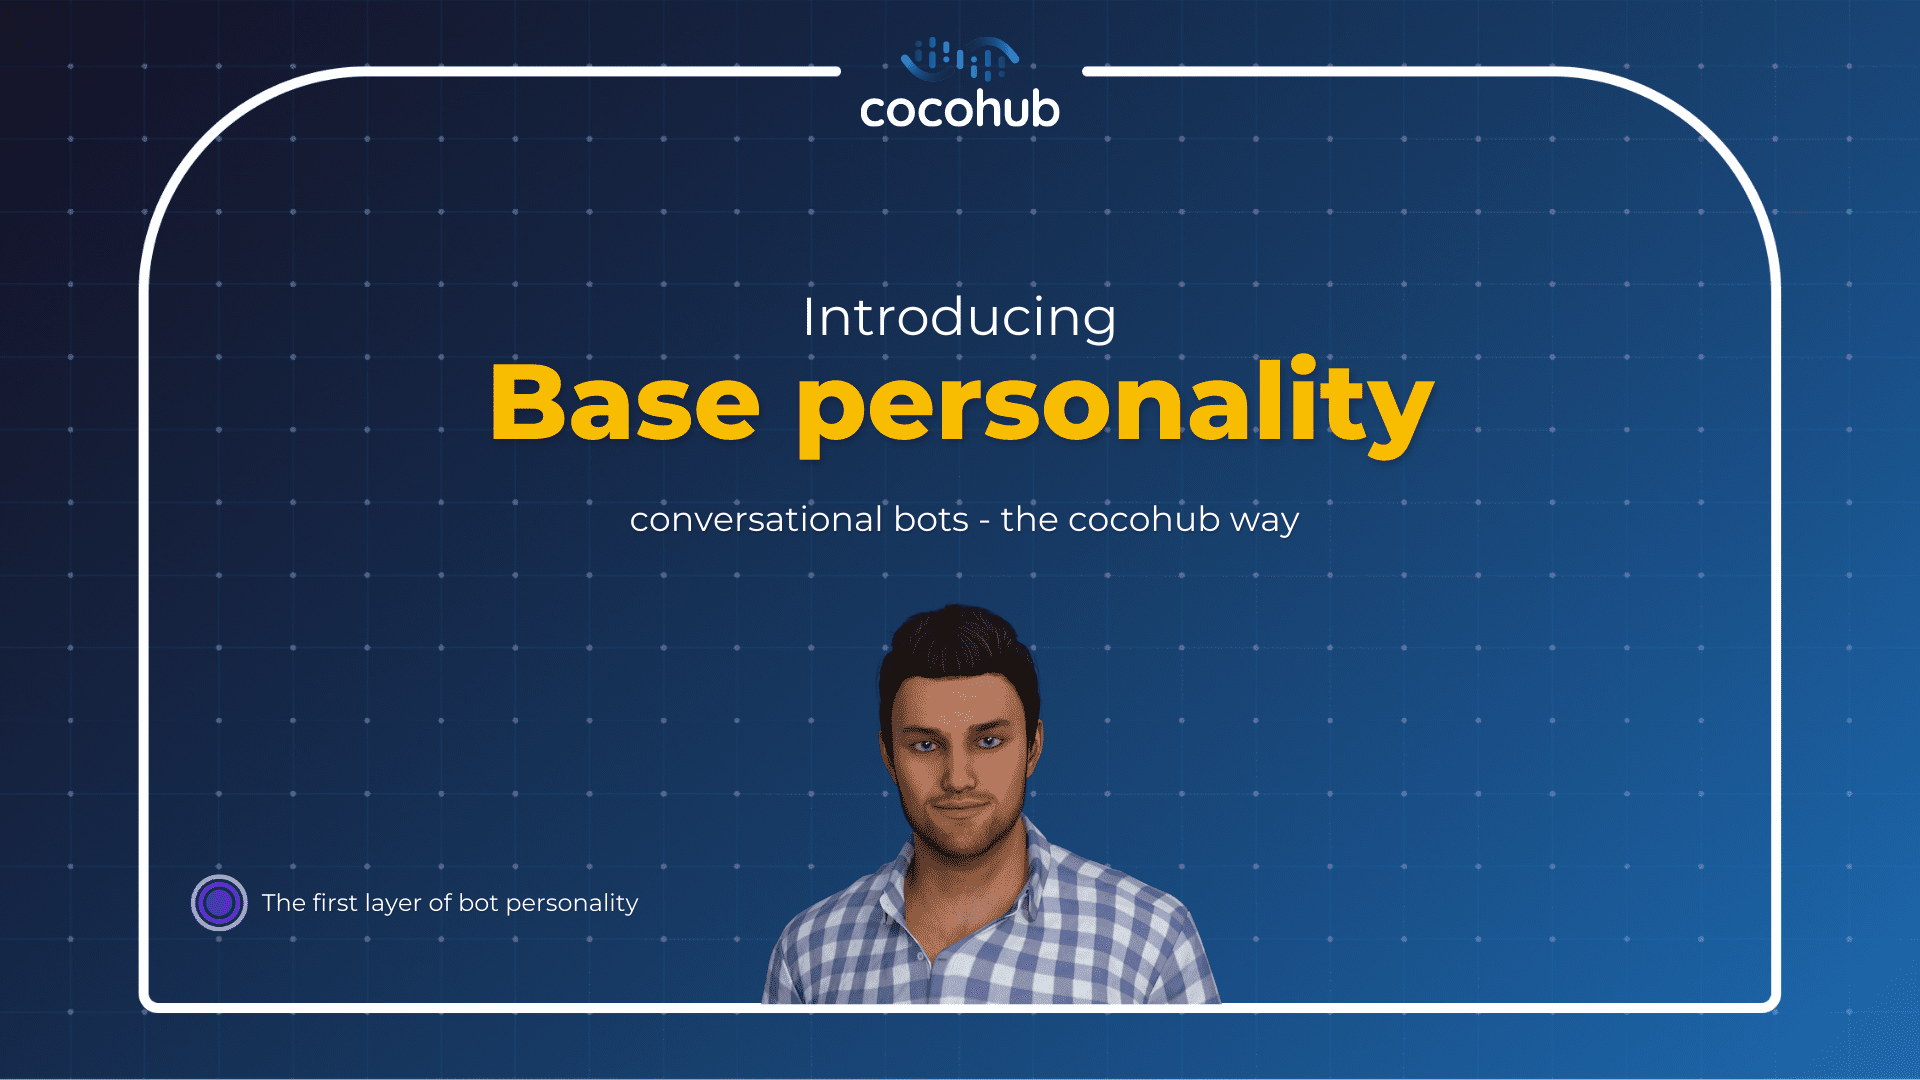 Introducing base personality